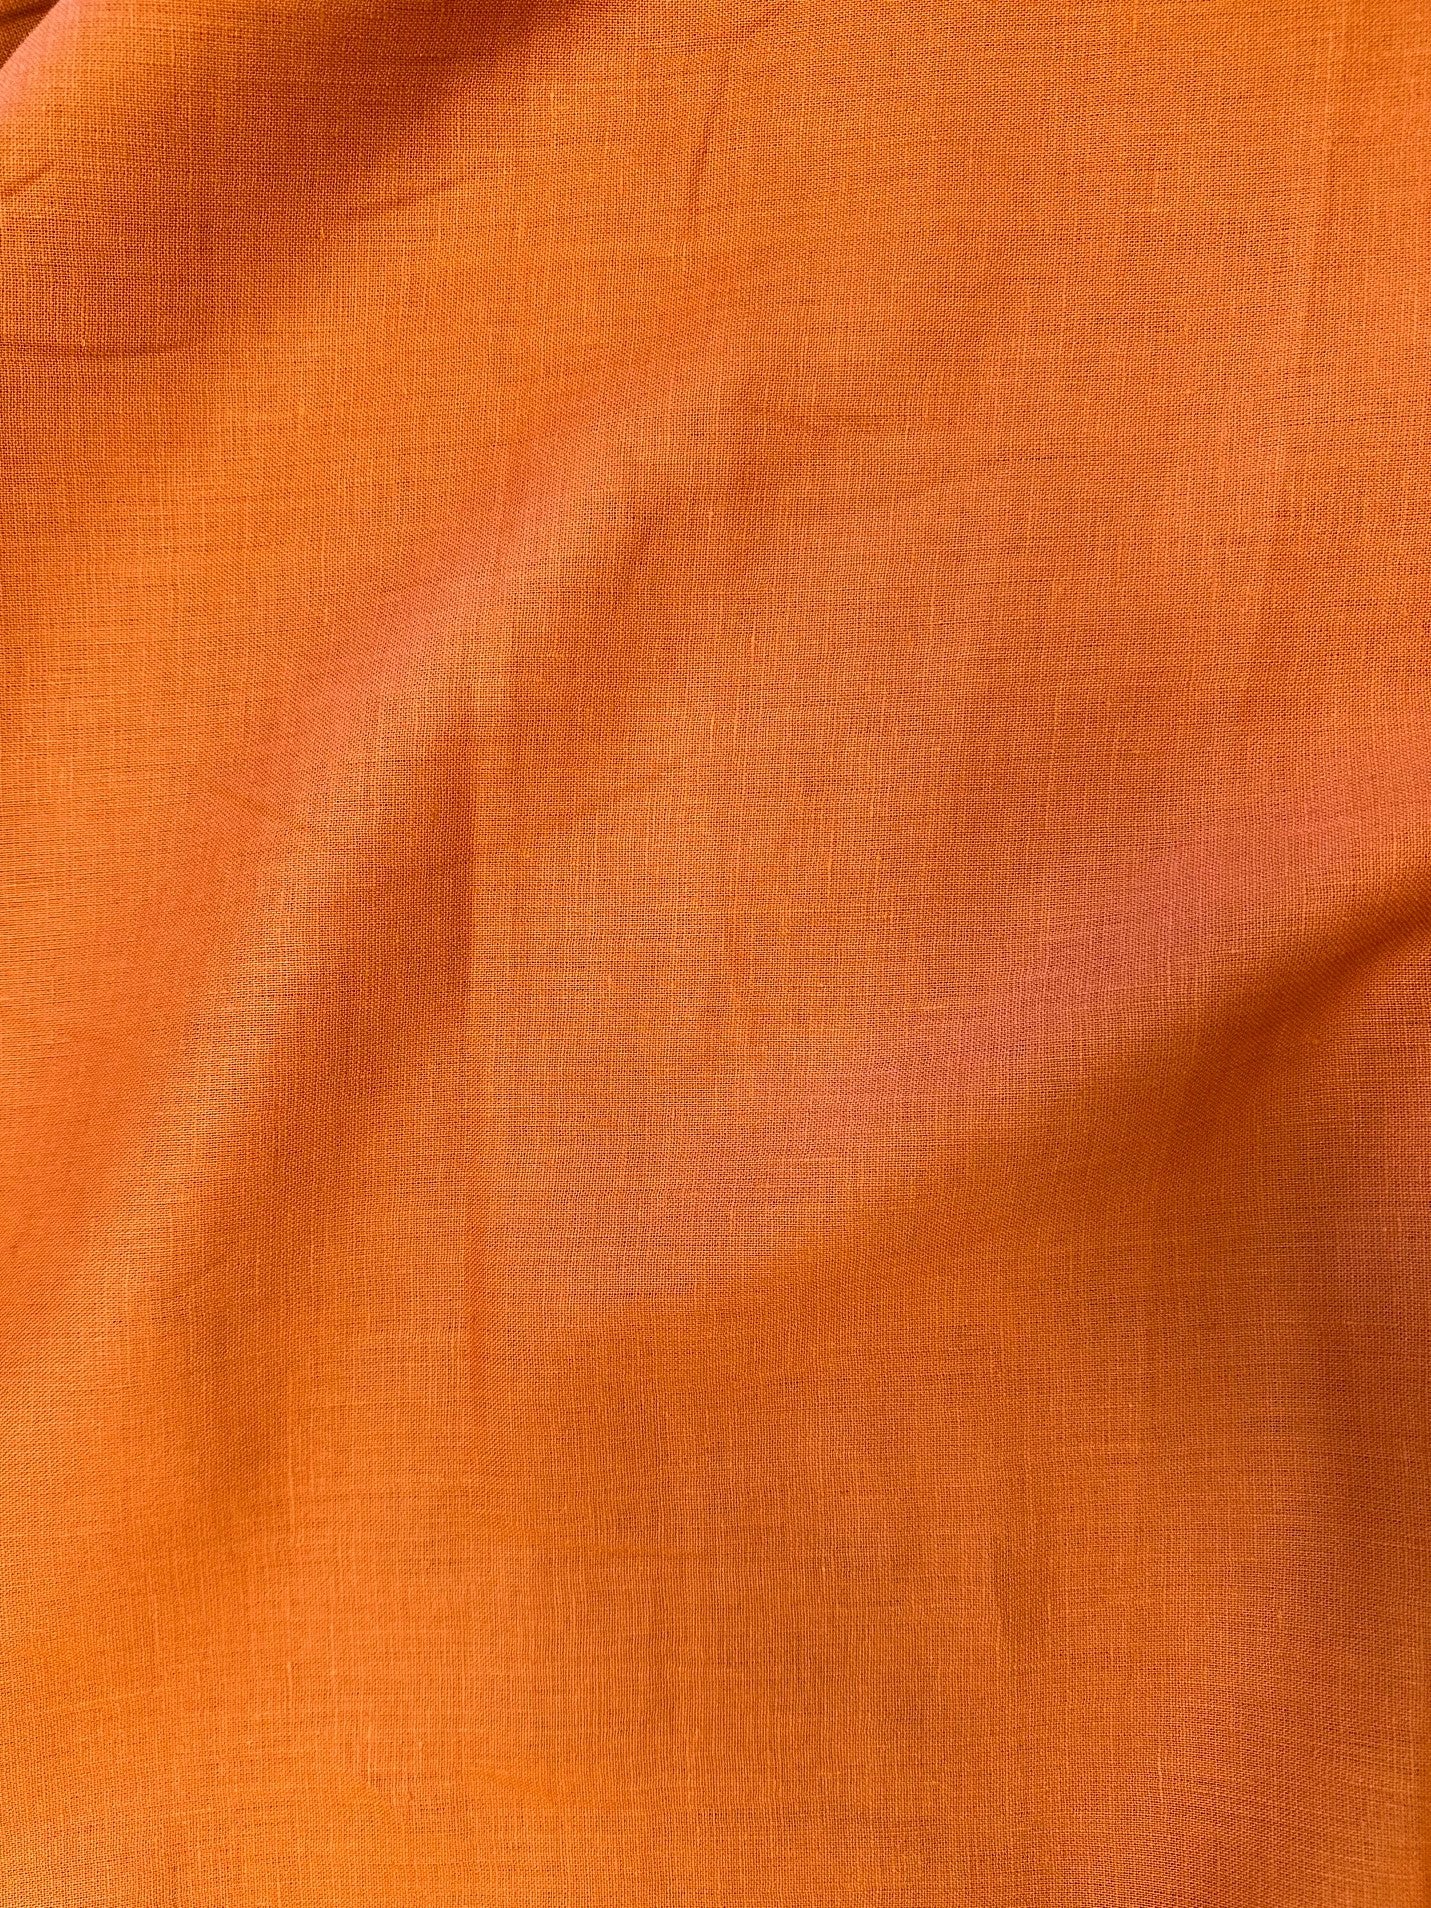 Rust colored linen fabric